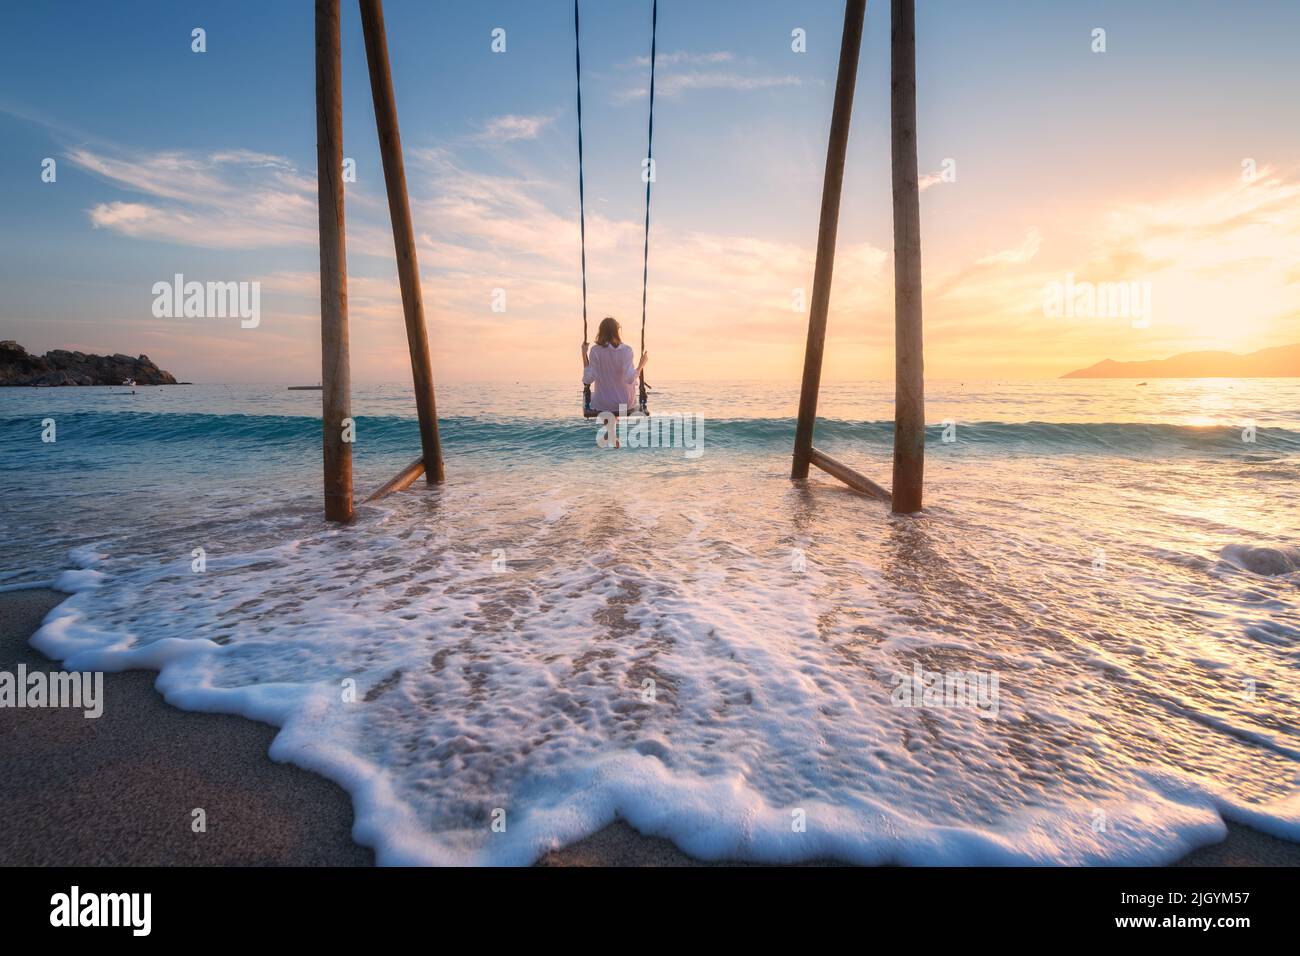 Happy young woman on wooden swing in water, sea with waves Stock Photo